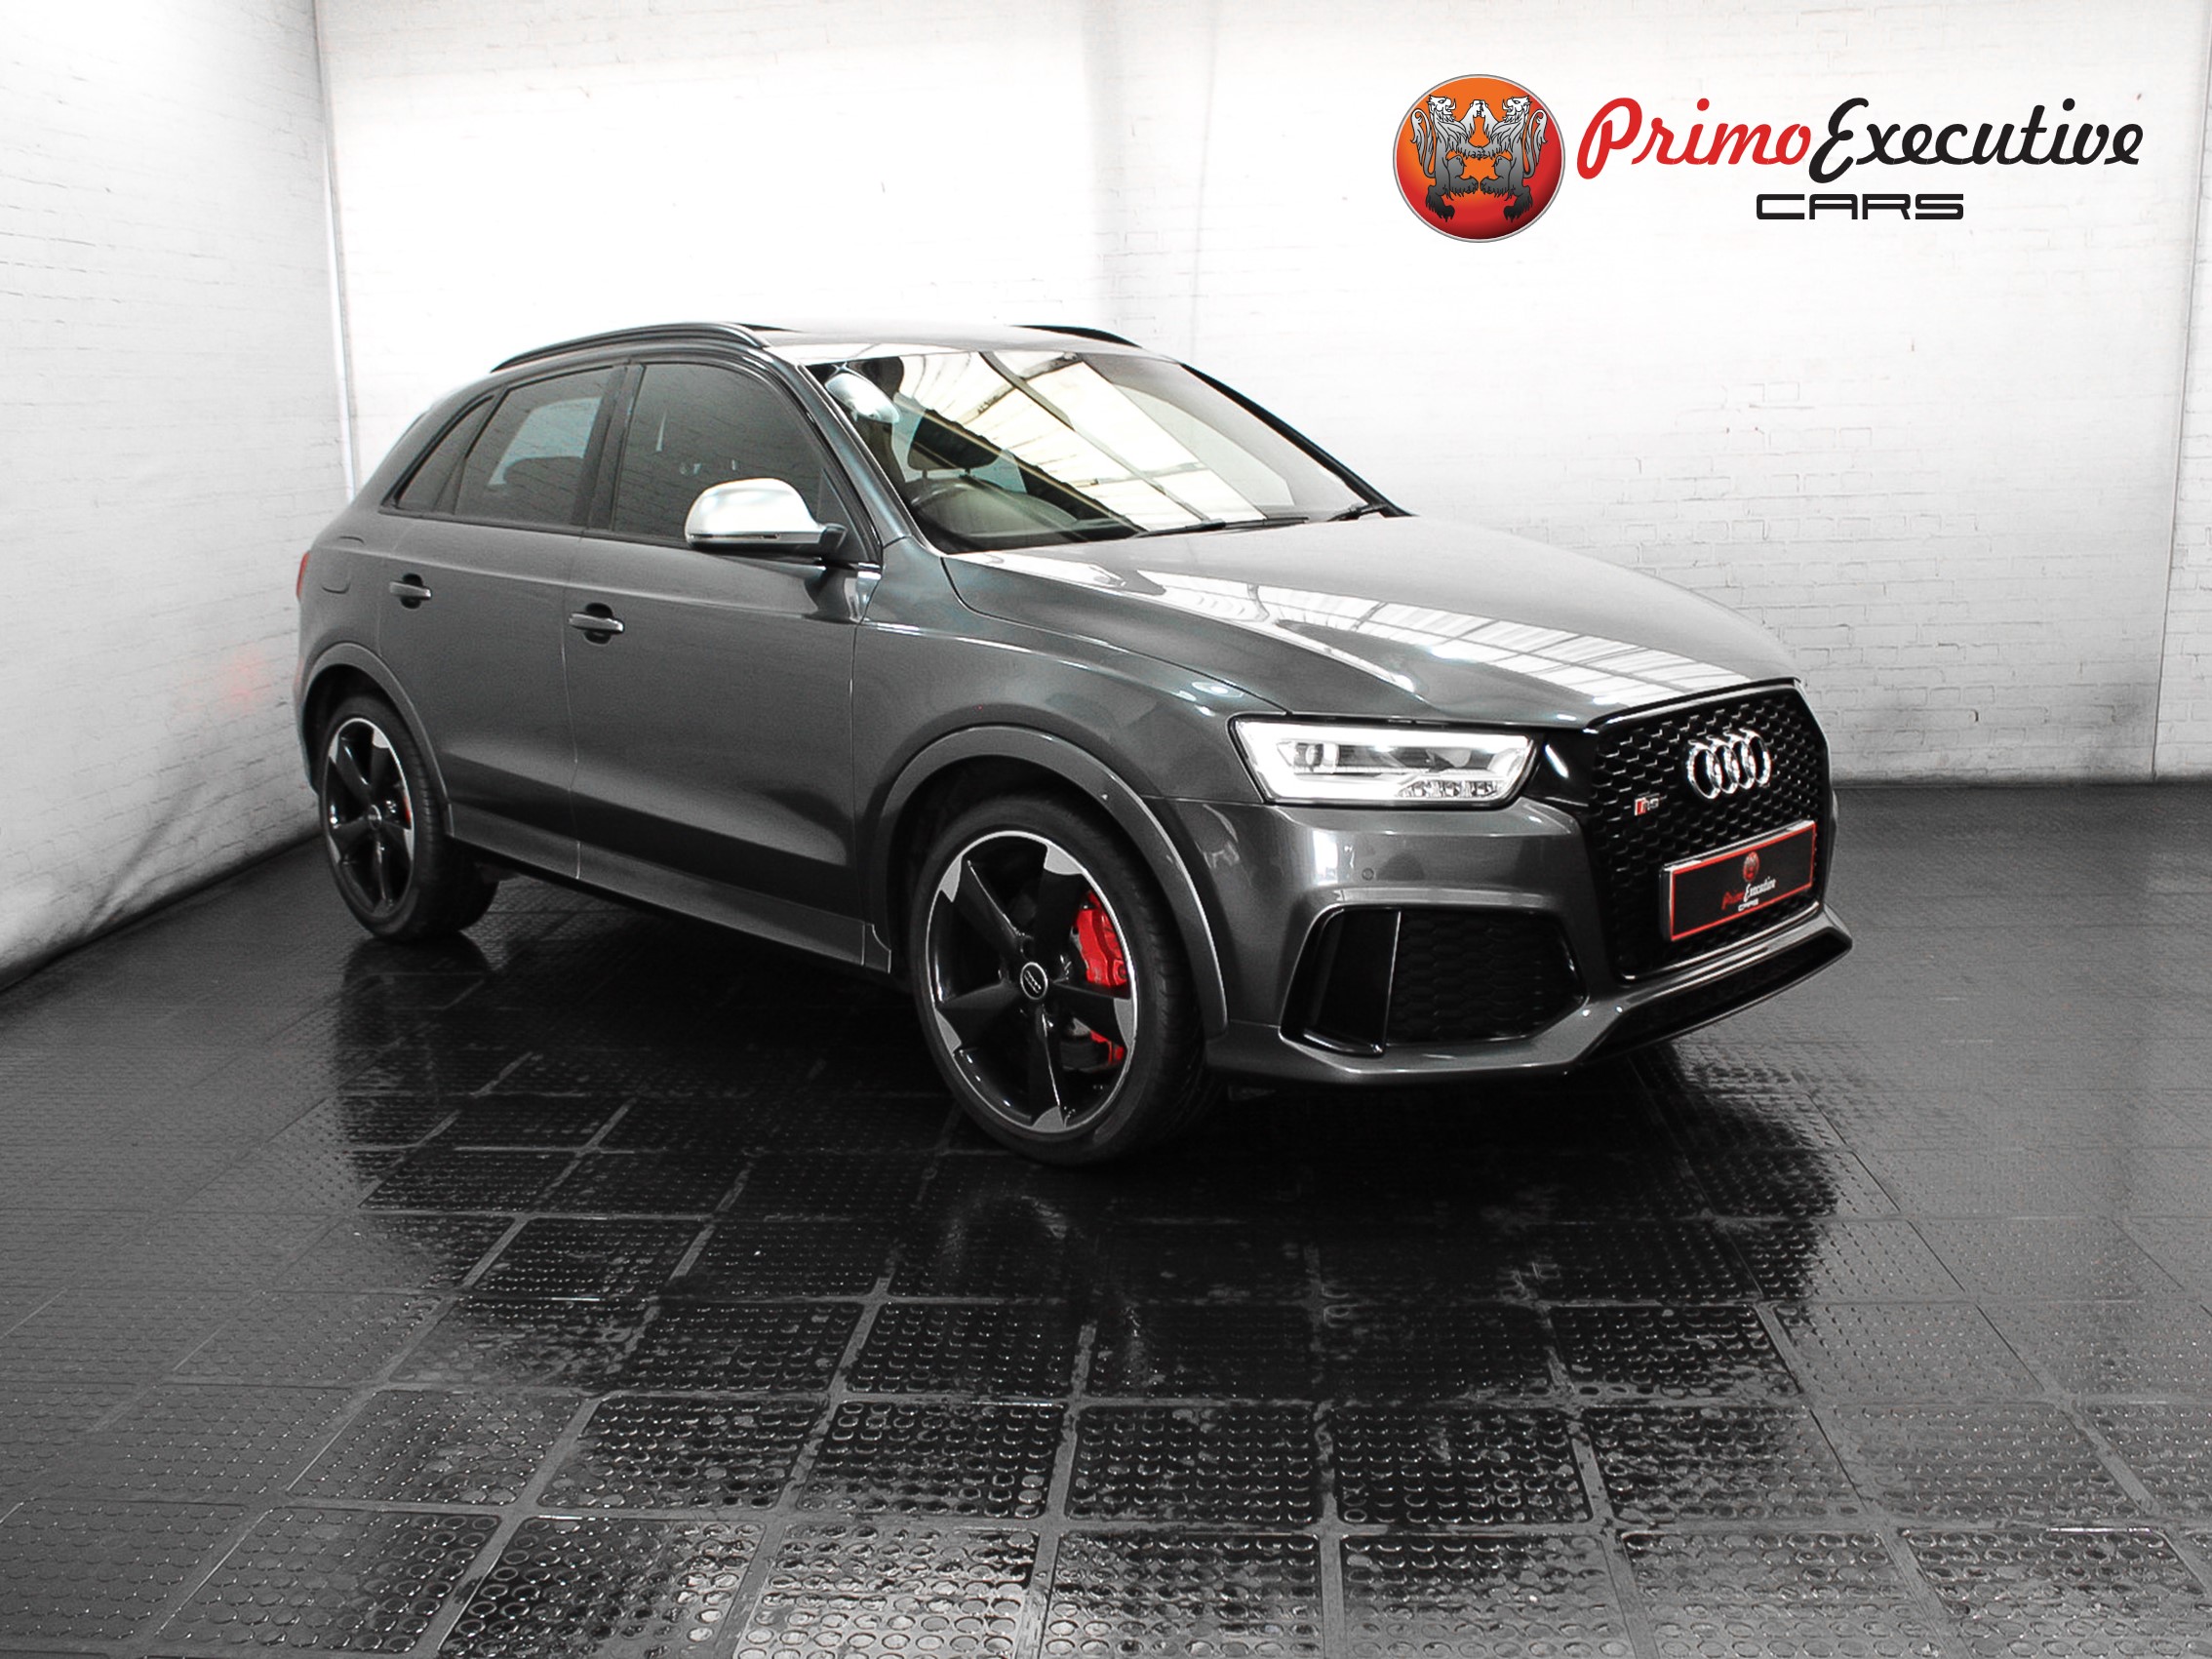 2019 Audi RS Q3  for sale - 510446